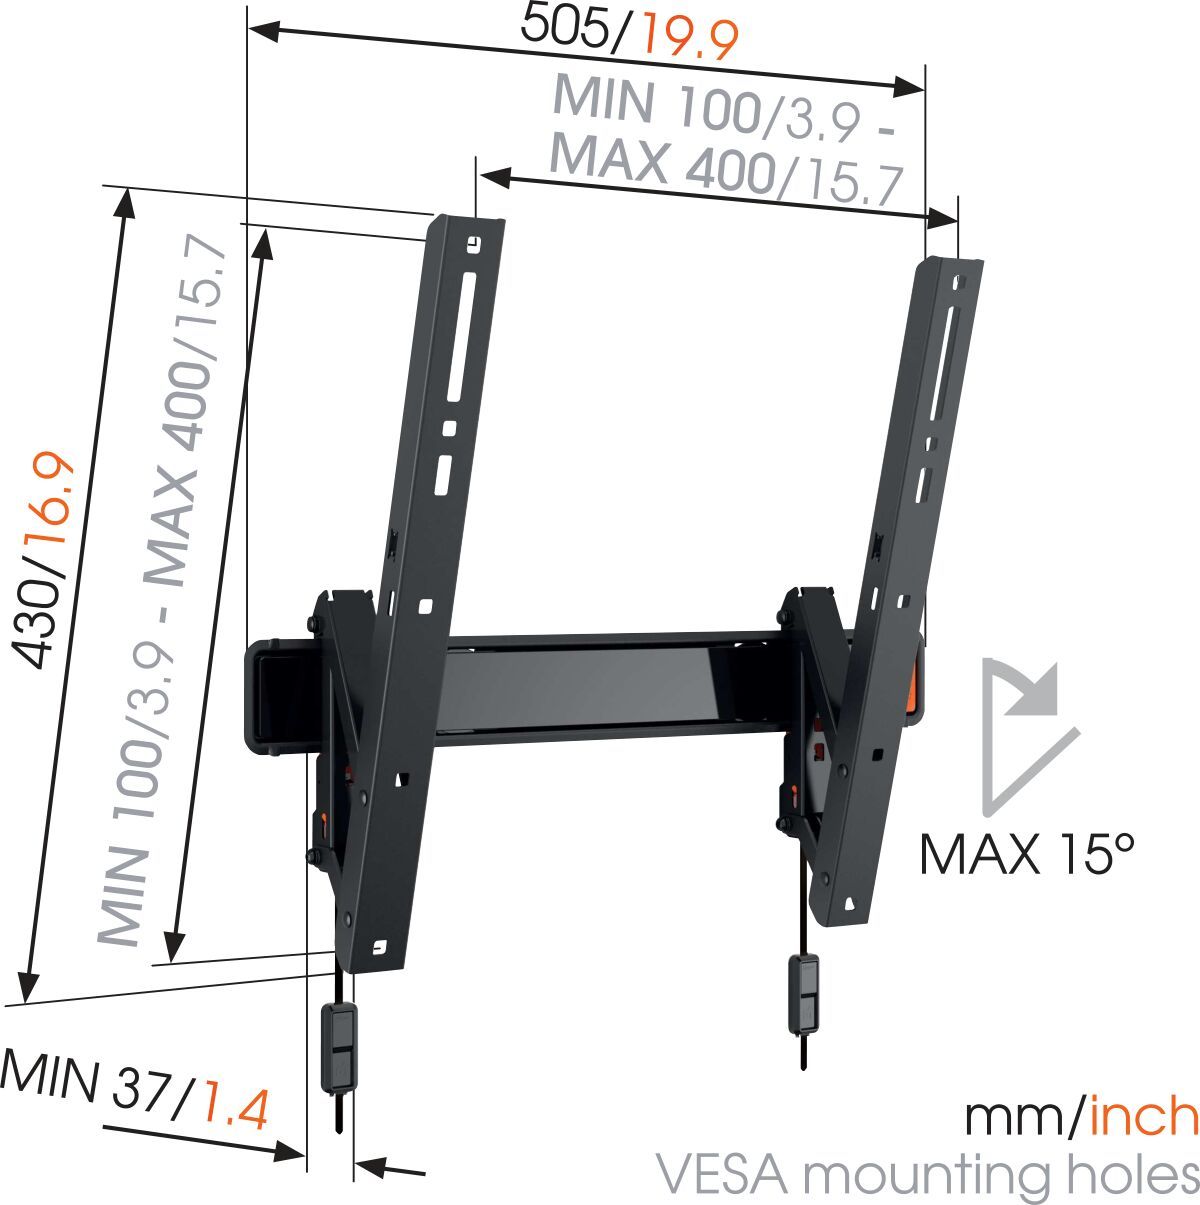 Vogel's WALL 2215 Tilting TV Wall Mount - Suitable for 32 up to 55 inch TVs up to Tilt up to 15° - Dimensions